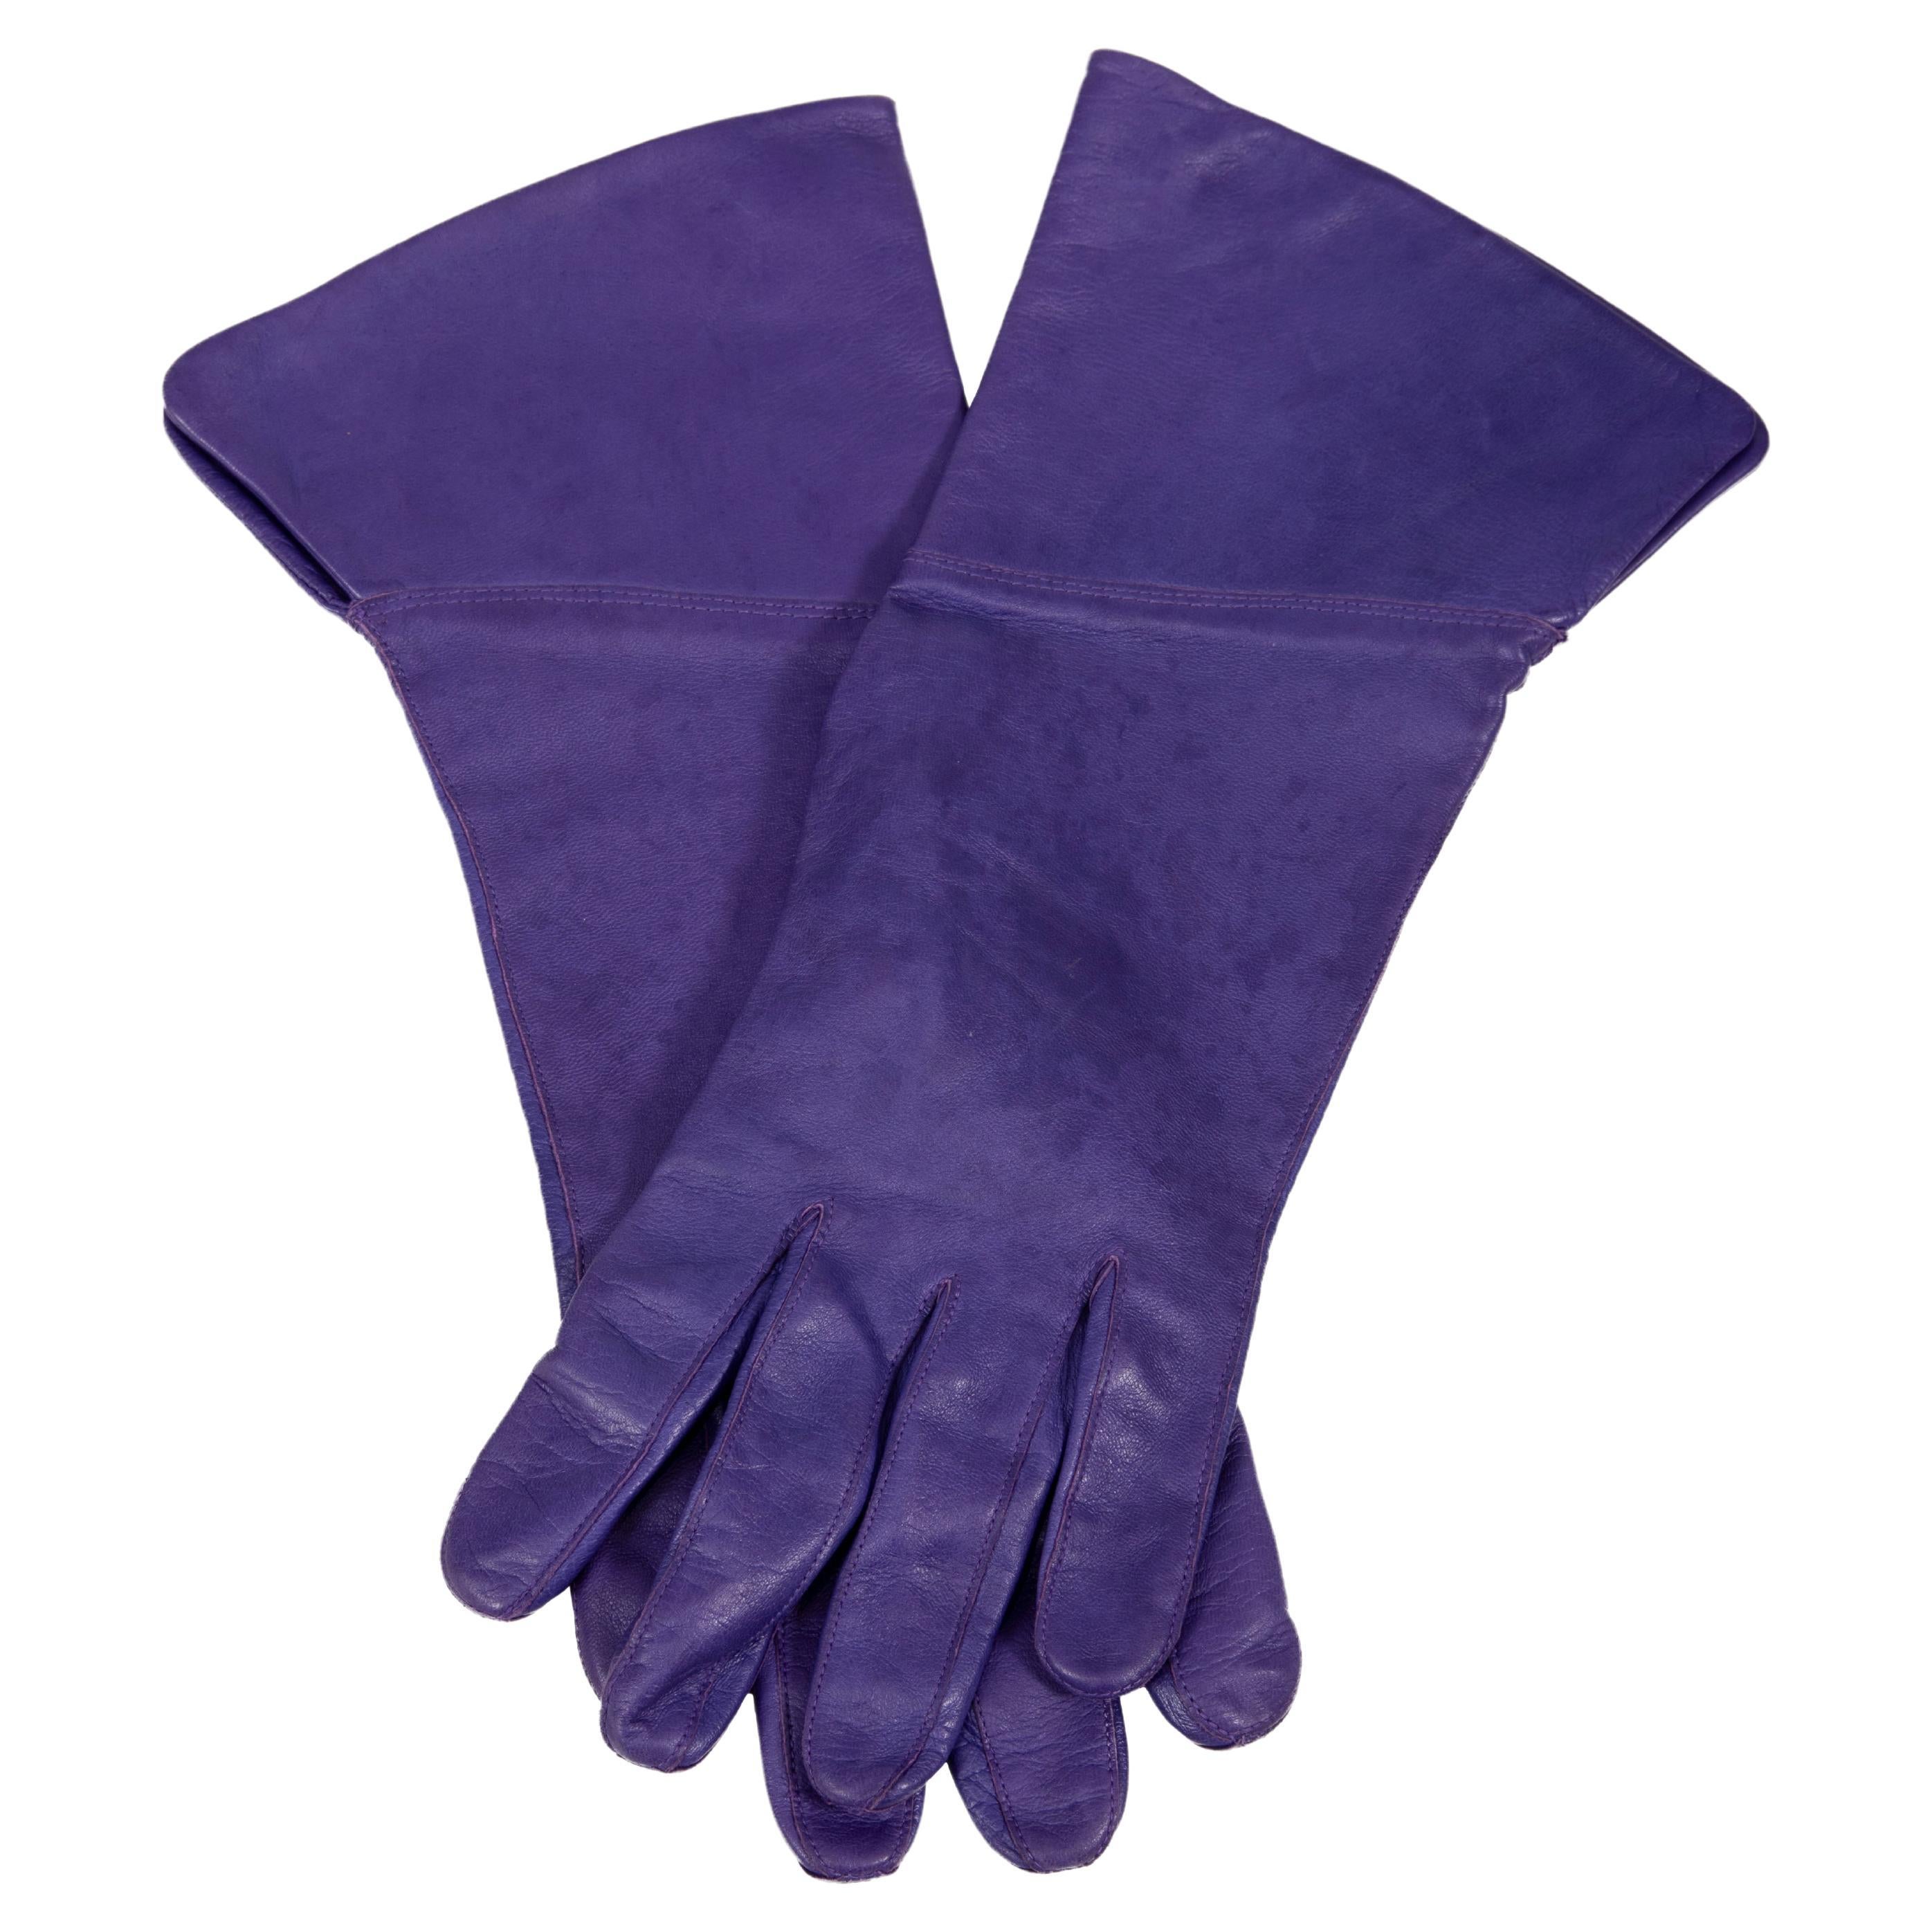 Roeckl Munich Purple Nappa Leather Gauntlet-Style Gloves with Flared Cuffs For Sale